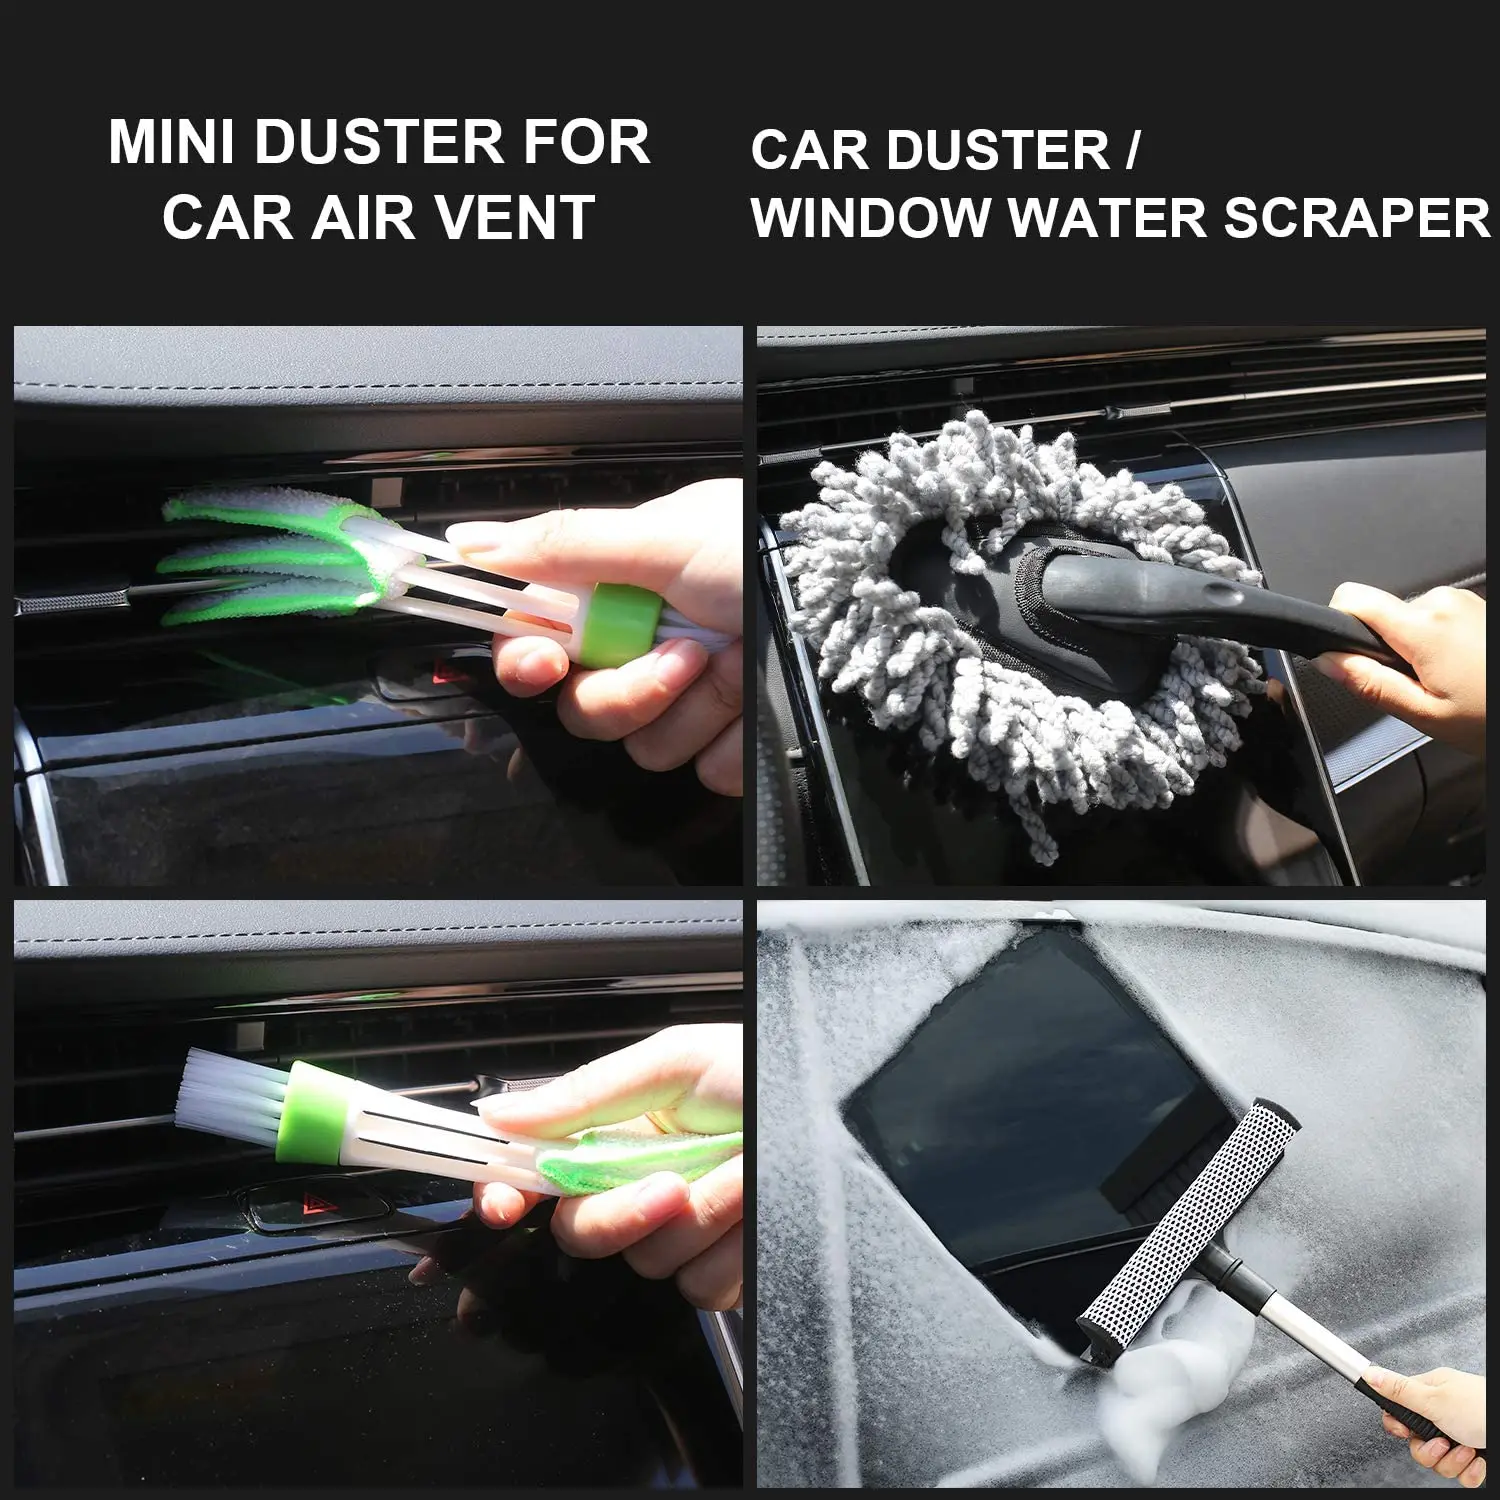 Window Water Blade Snow Eagle-L 10Pcs Car Cleaning Tools Kit Car Wash Sponges Car Wash Tools Kit for Detailing Interiors Premium Microfiber Cleaning Cloth Tire Brush 